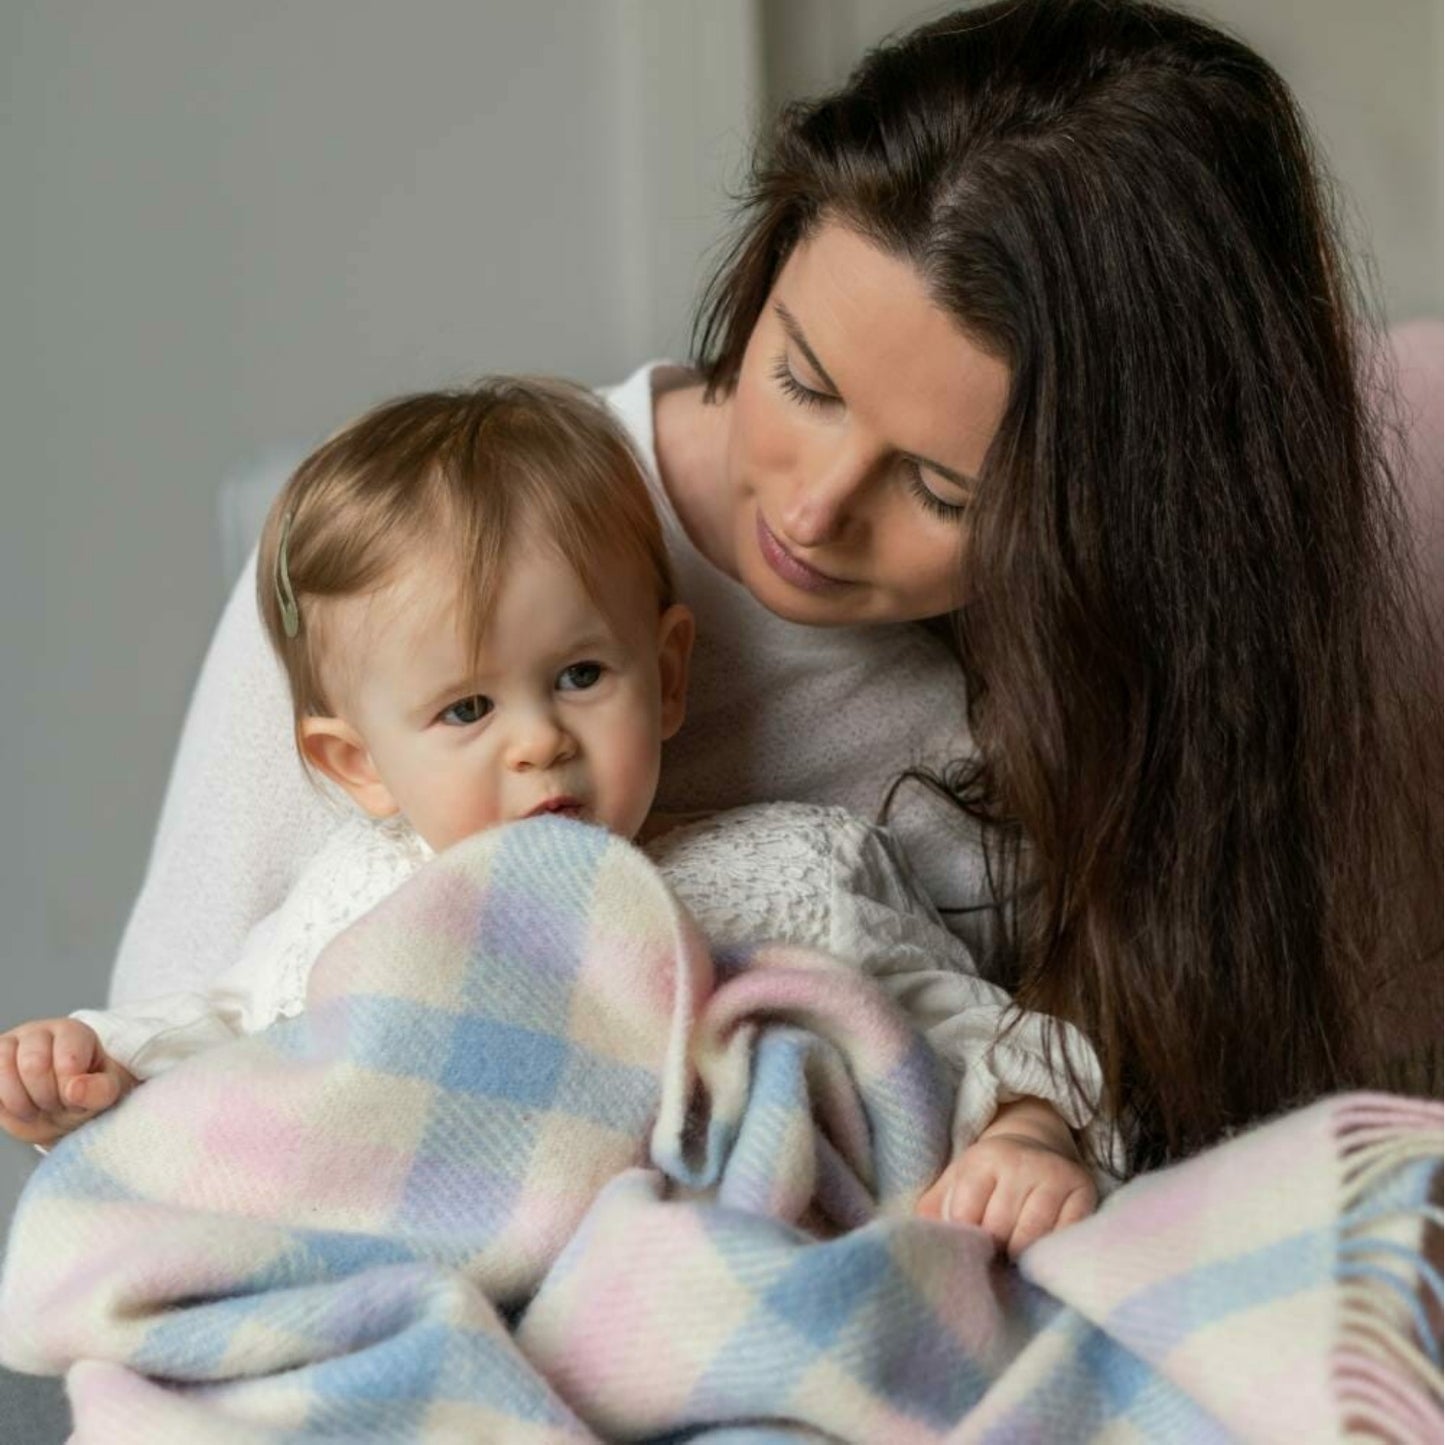 John Hanly Irish Wool Baby Blanket | White, Pink & Blue Border Block Check | 100% Pure Irish Wool Blanket | Lifestyle: Baby and Mother with Blanket | BeoVERDE Ireland